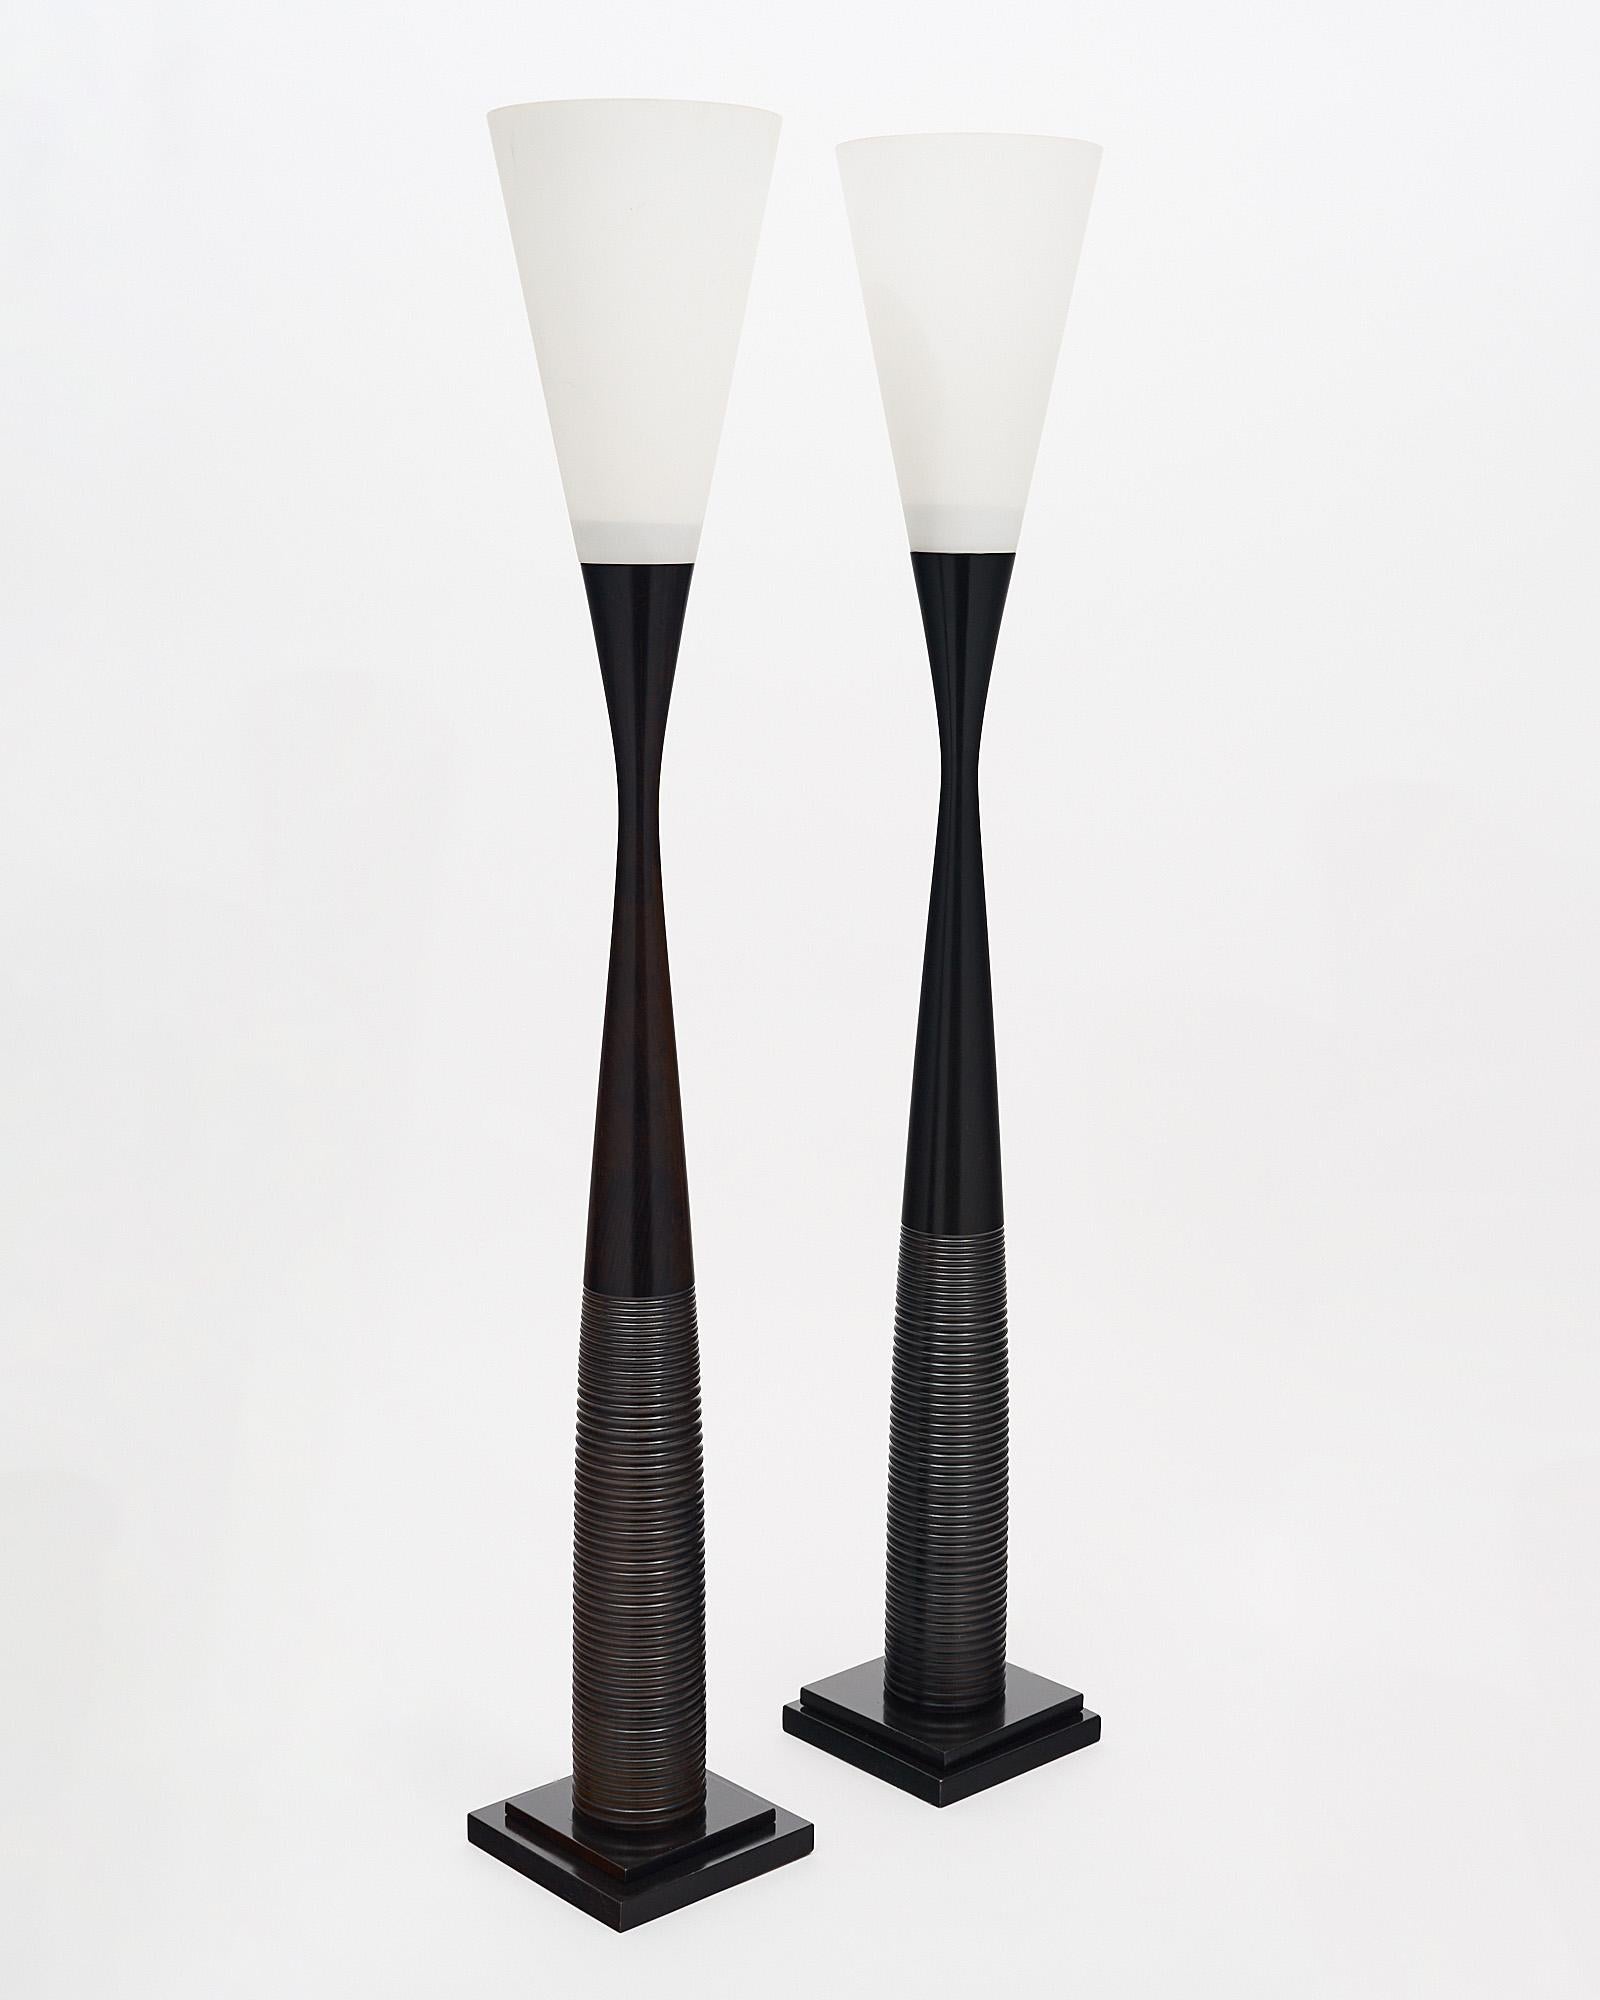 Pair of Art Deco Totem floor lamps from France. Each light features a turned wood base with the classic Art Deco details. Sitting atop each base is a conical white glass shade. This pair has been newly wired to fit US standards.